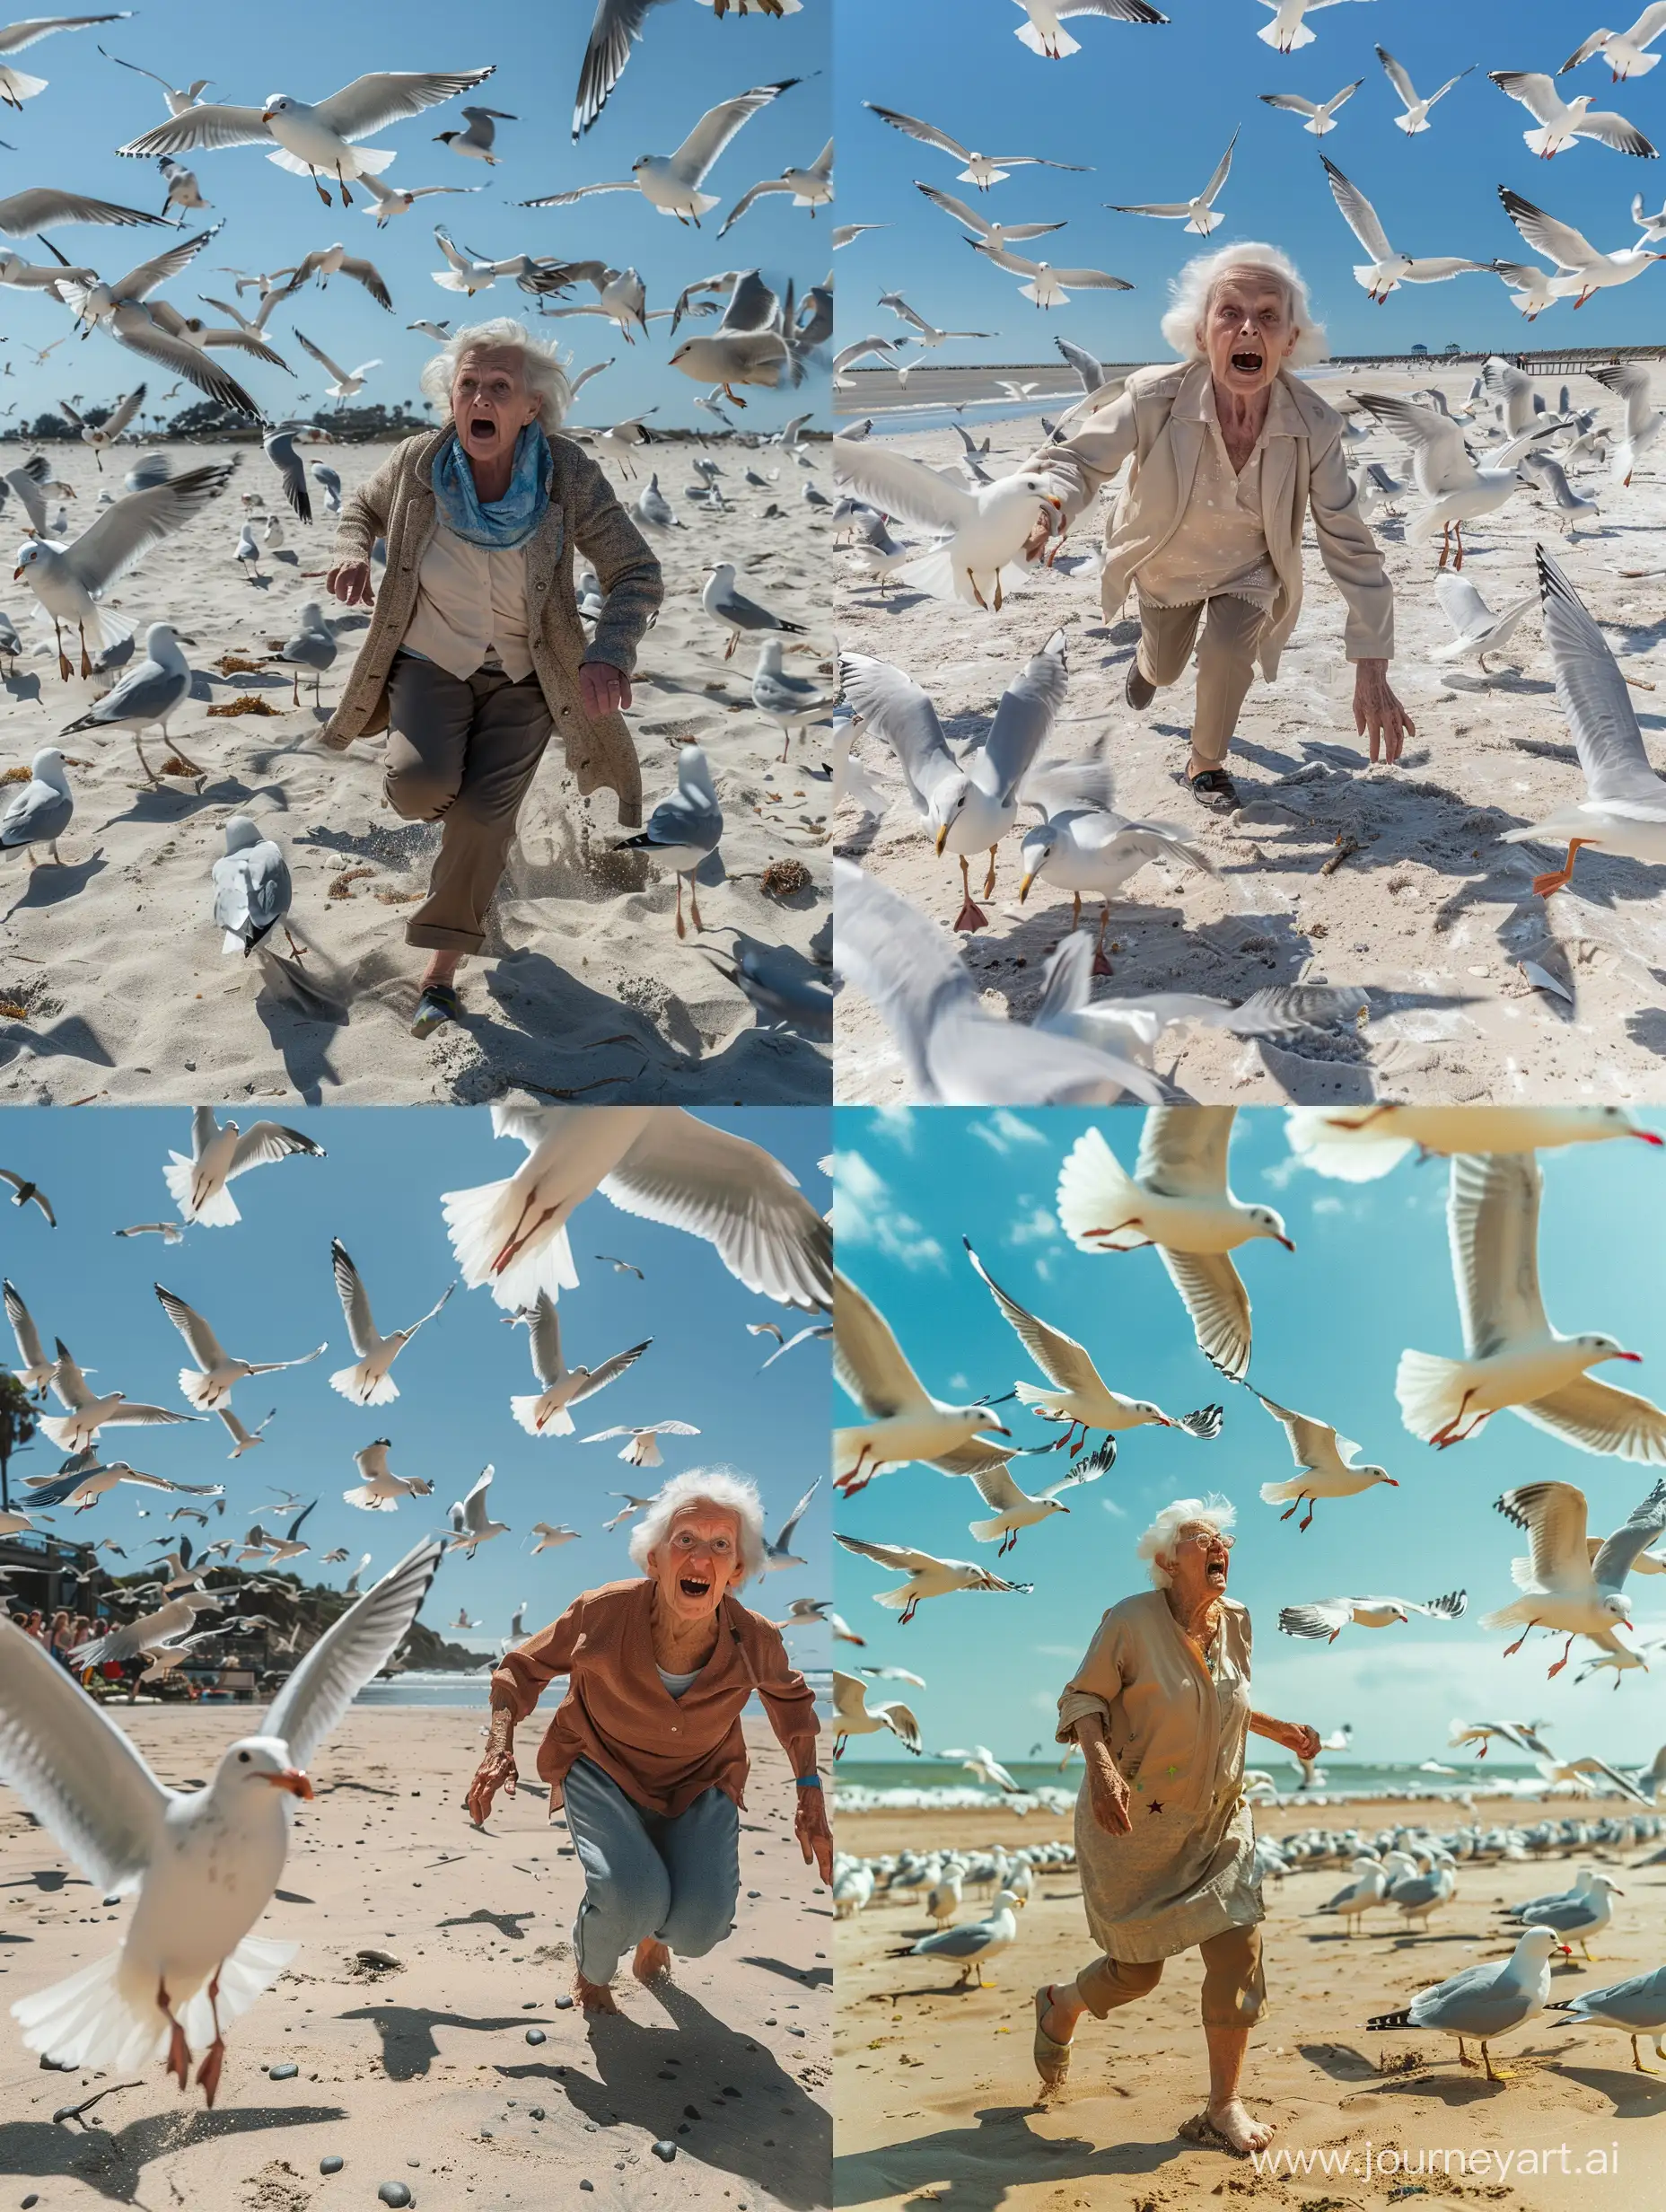 Elderly-Woman-Surprised-by-Flock-of-Seagulls-on-Sunny-Beach